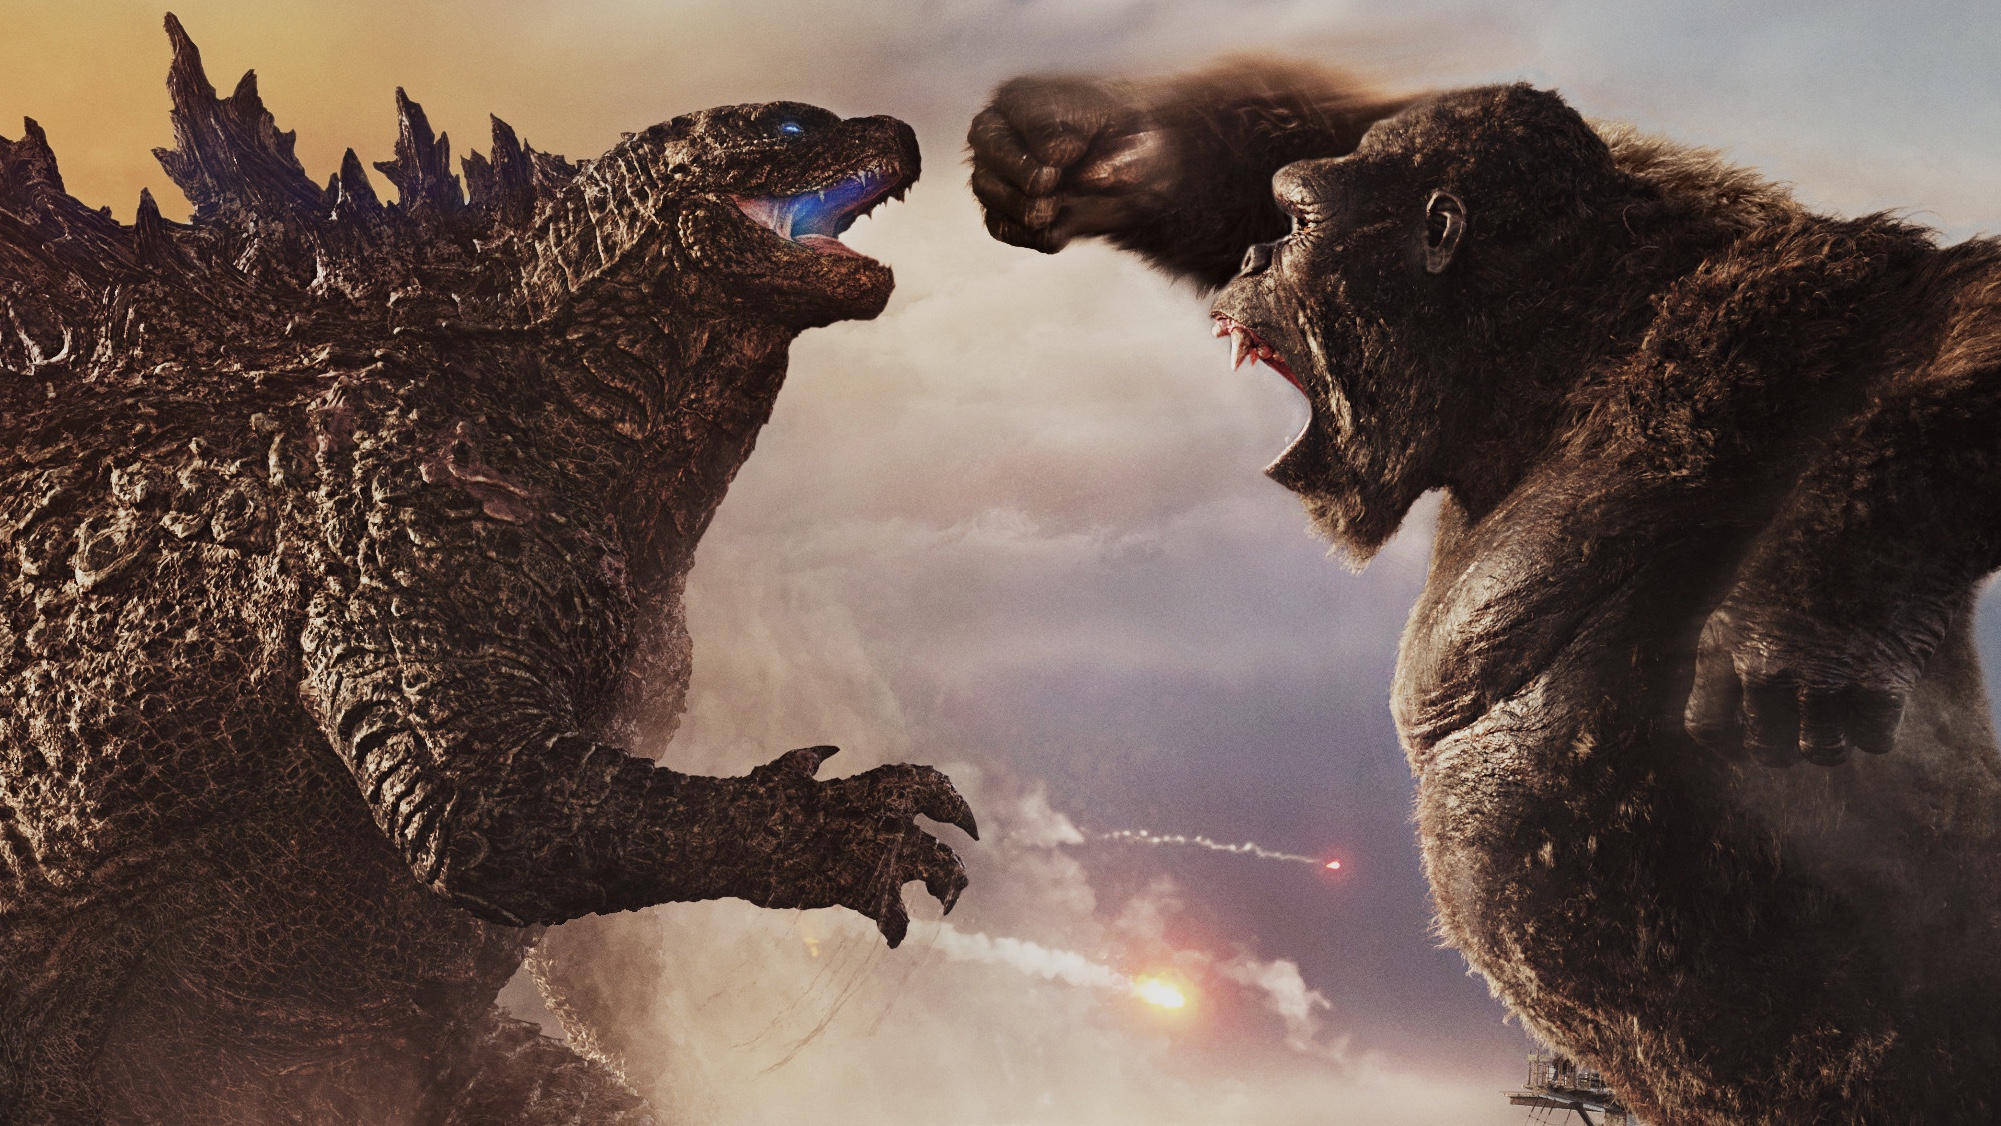 Who Won Godzilla Vs Kong The Ending Explained Toms Guide 2466